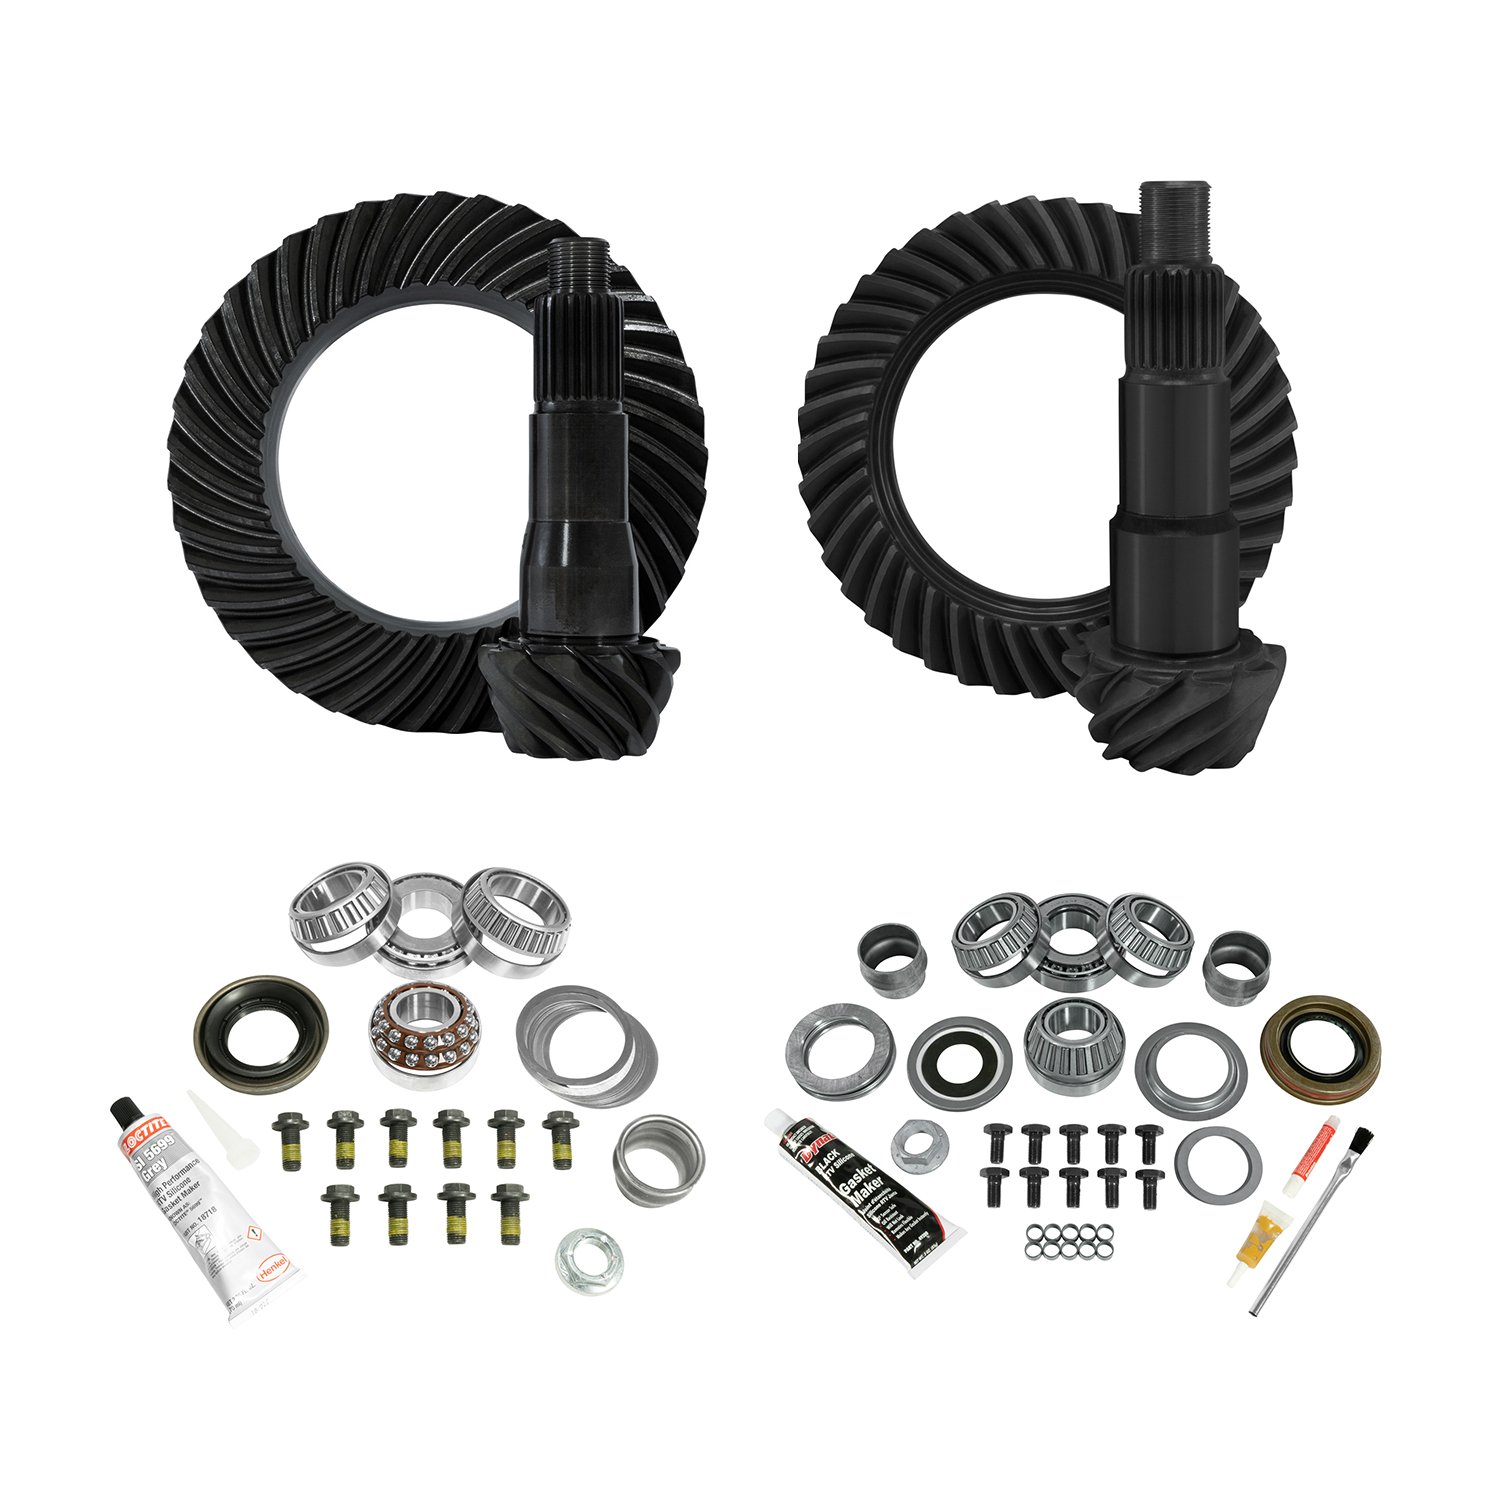 Re-Gear And Install Kit, D30 Front/D35 Rear, Jeep Jl Non-Rubicon, 4.56